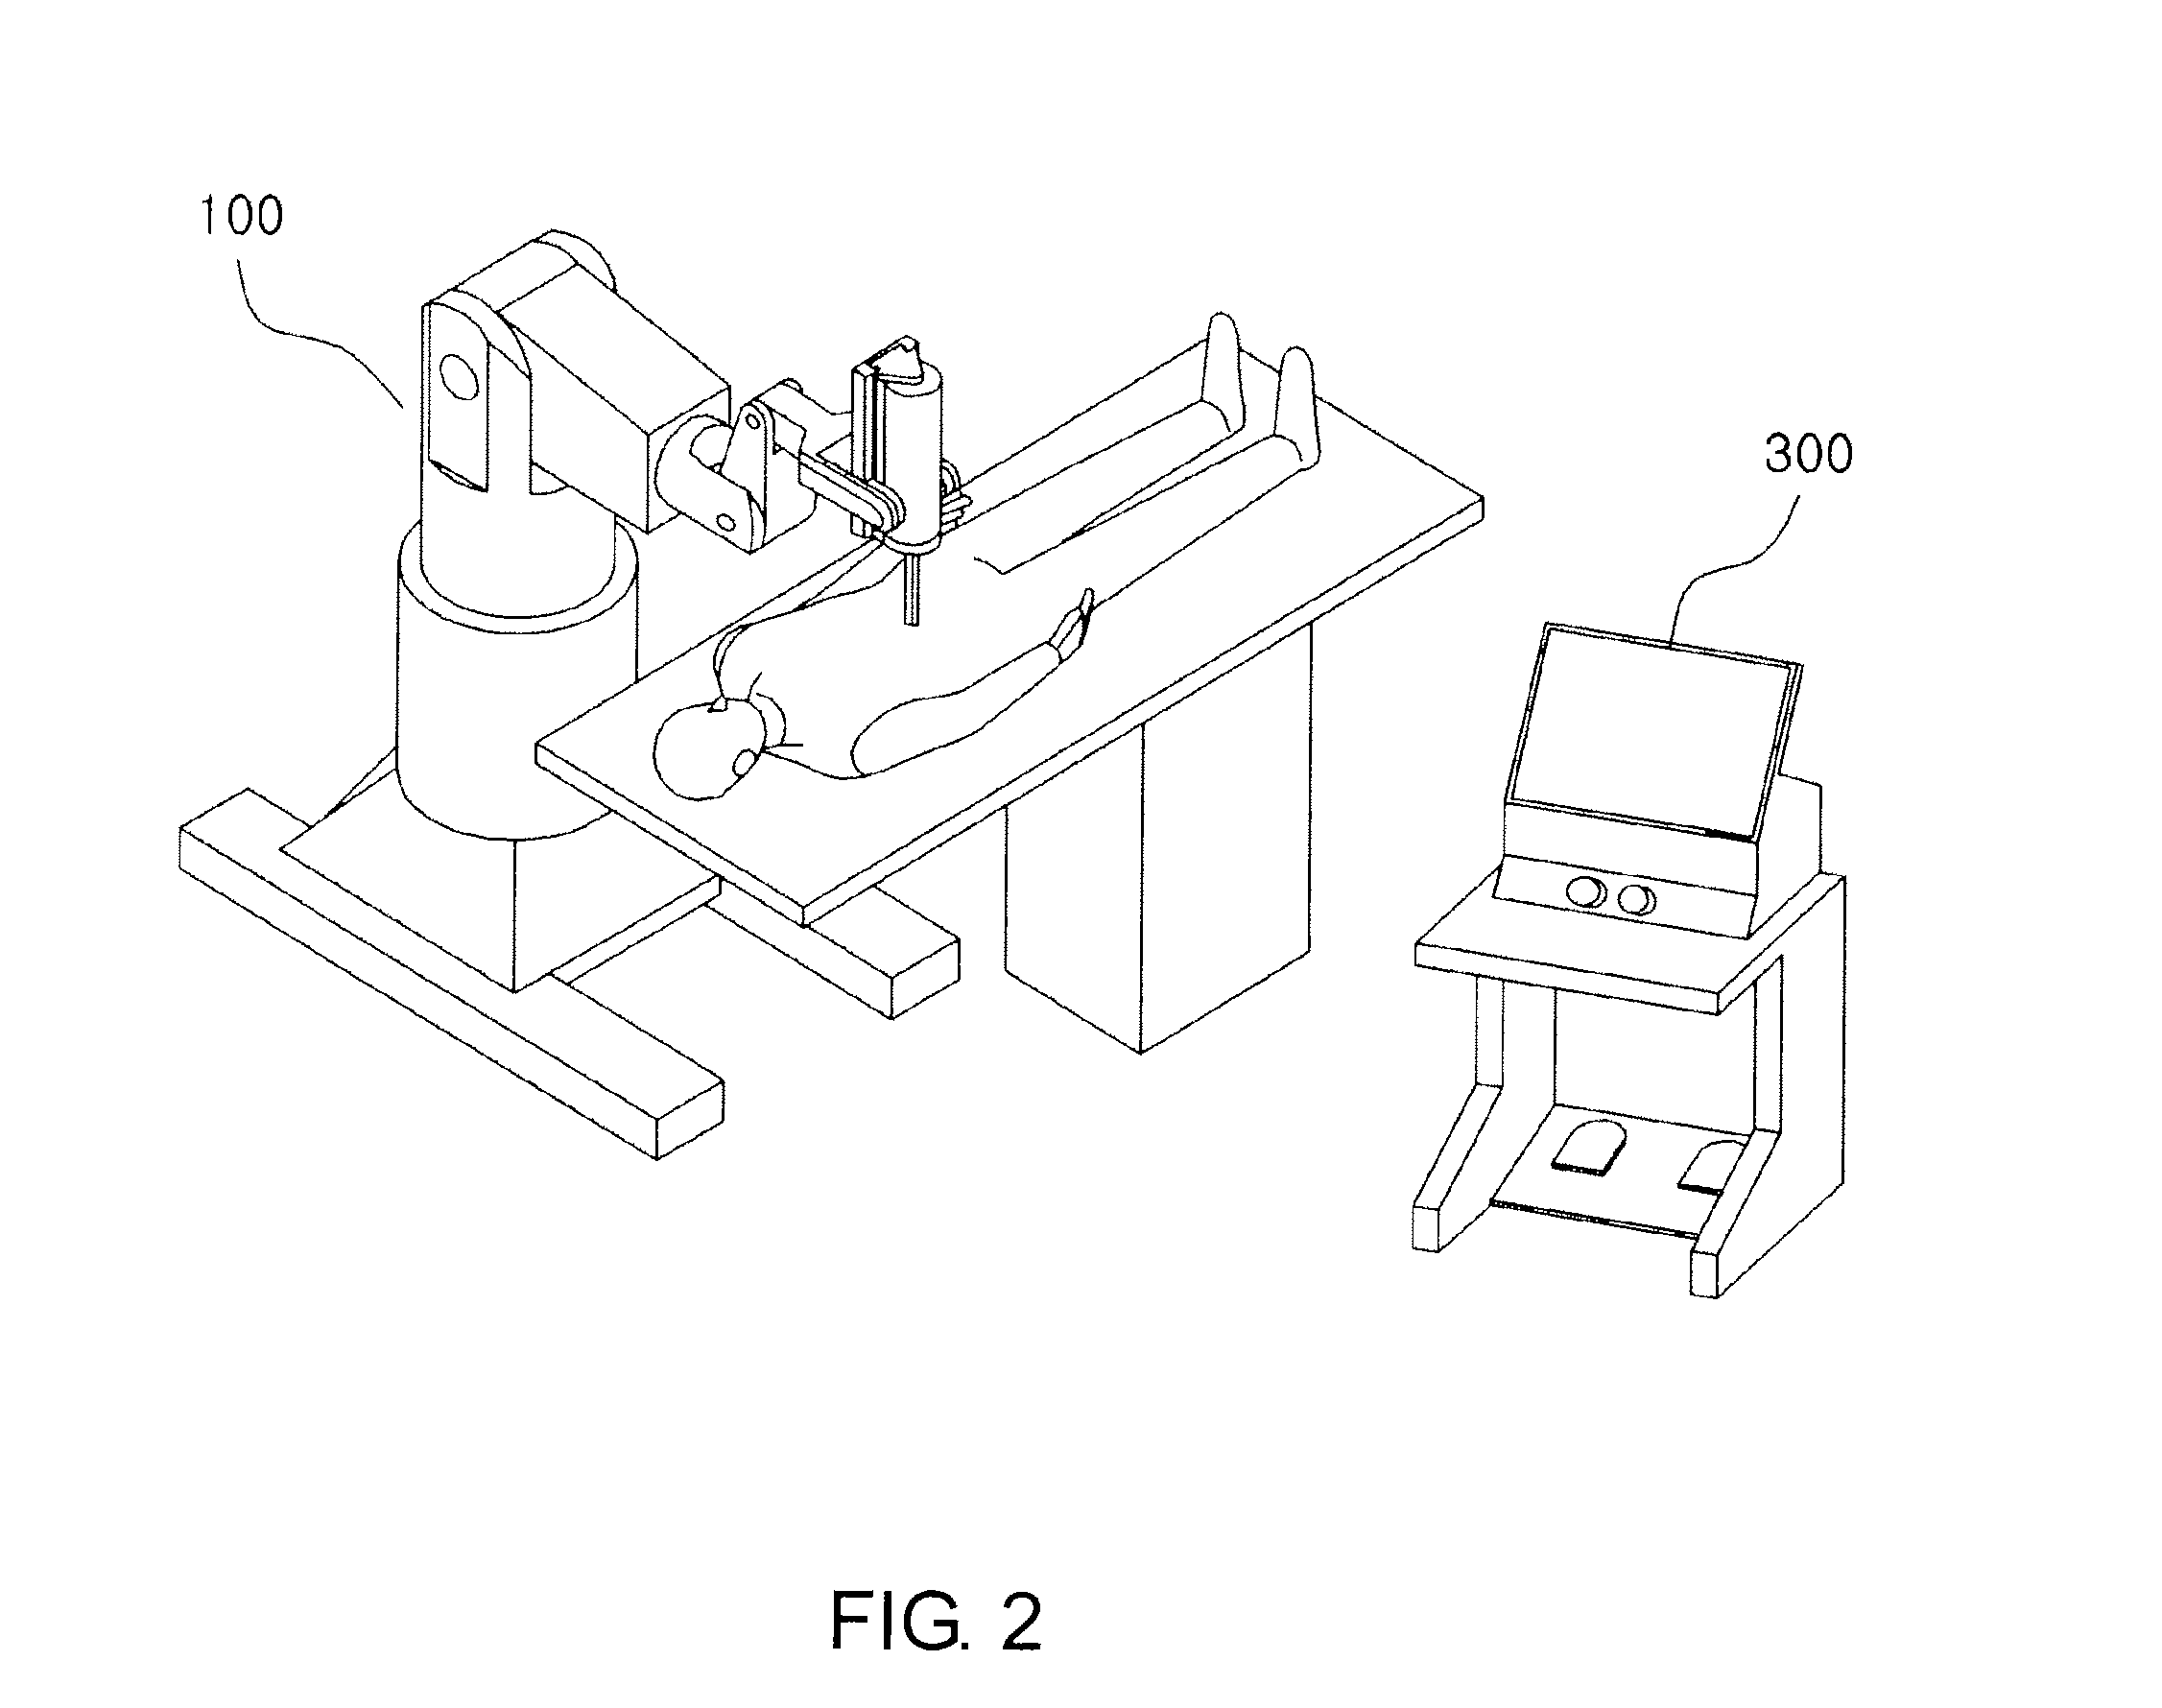 Surgical robot system for performing surgery based on displacement information determined by the specification of the user, and method for controlling same